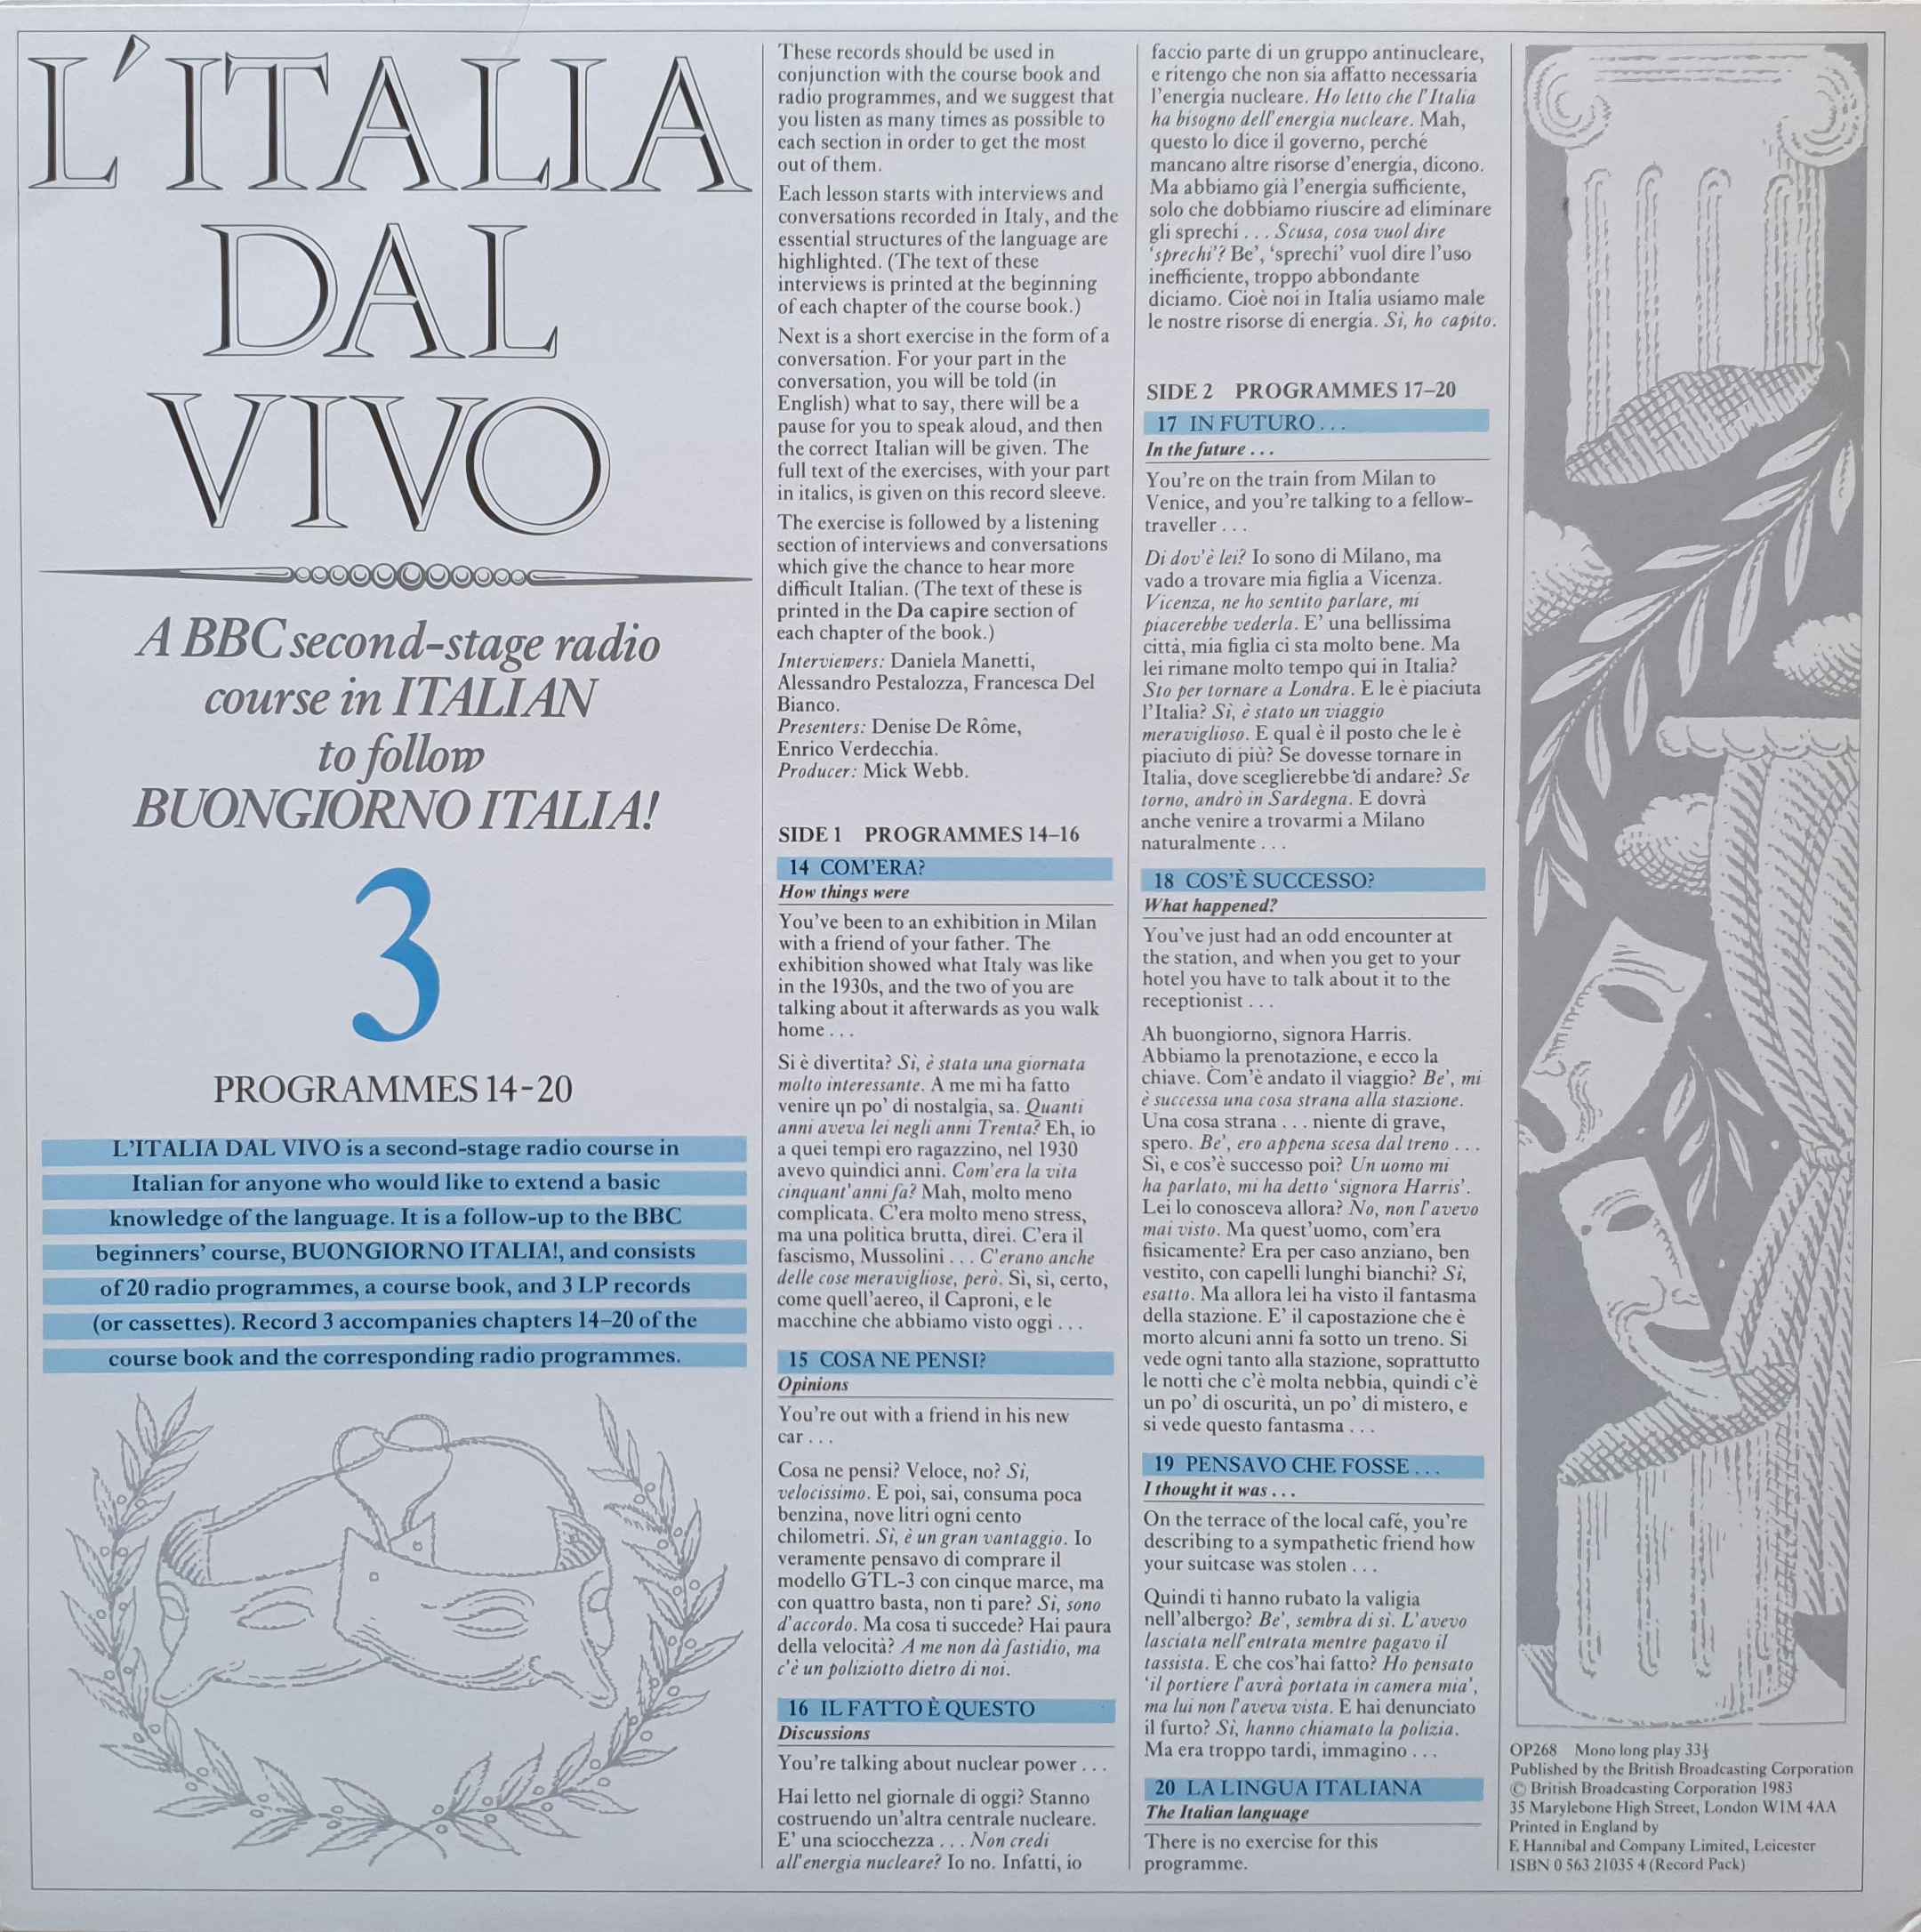 Picture of OP 268 L' Italia dal vivo - 14-20 by artist Various from the BBC records and Tapes library